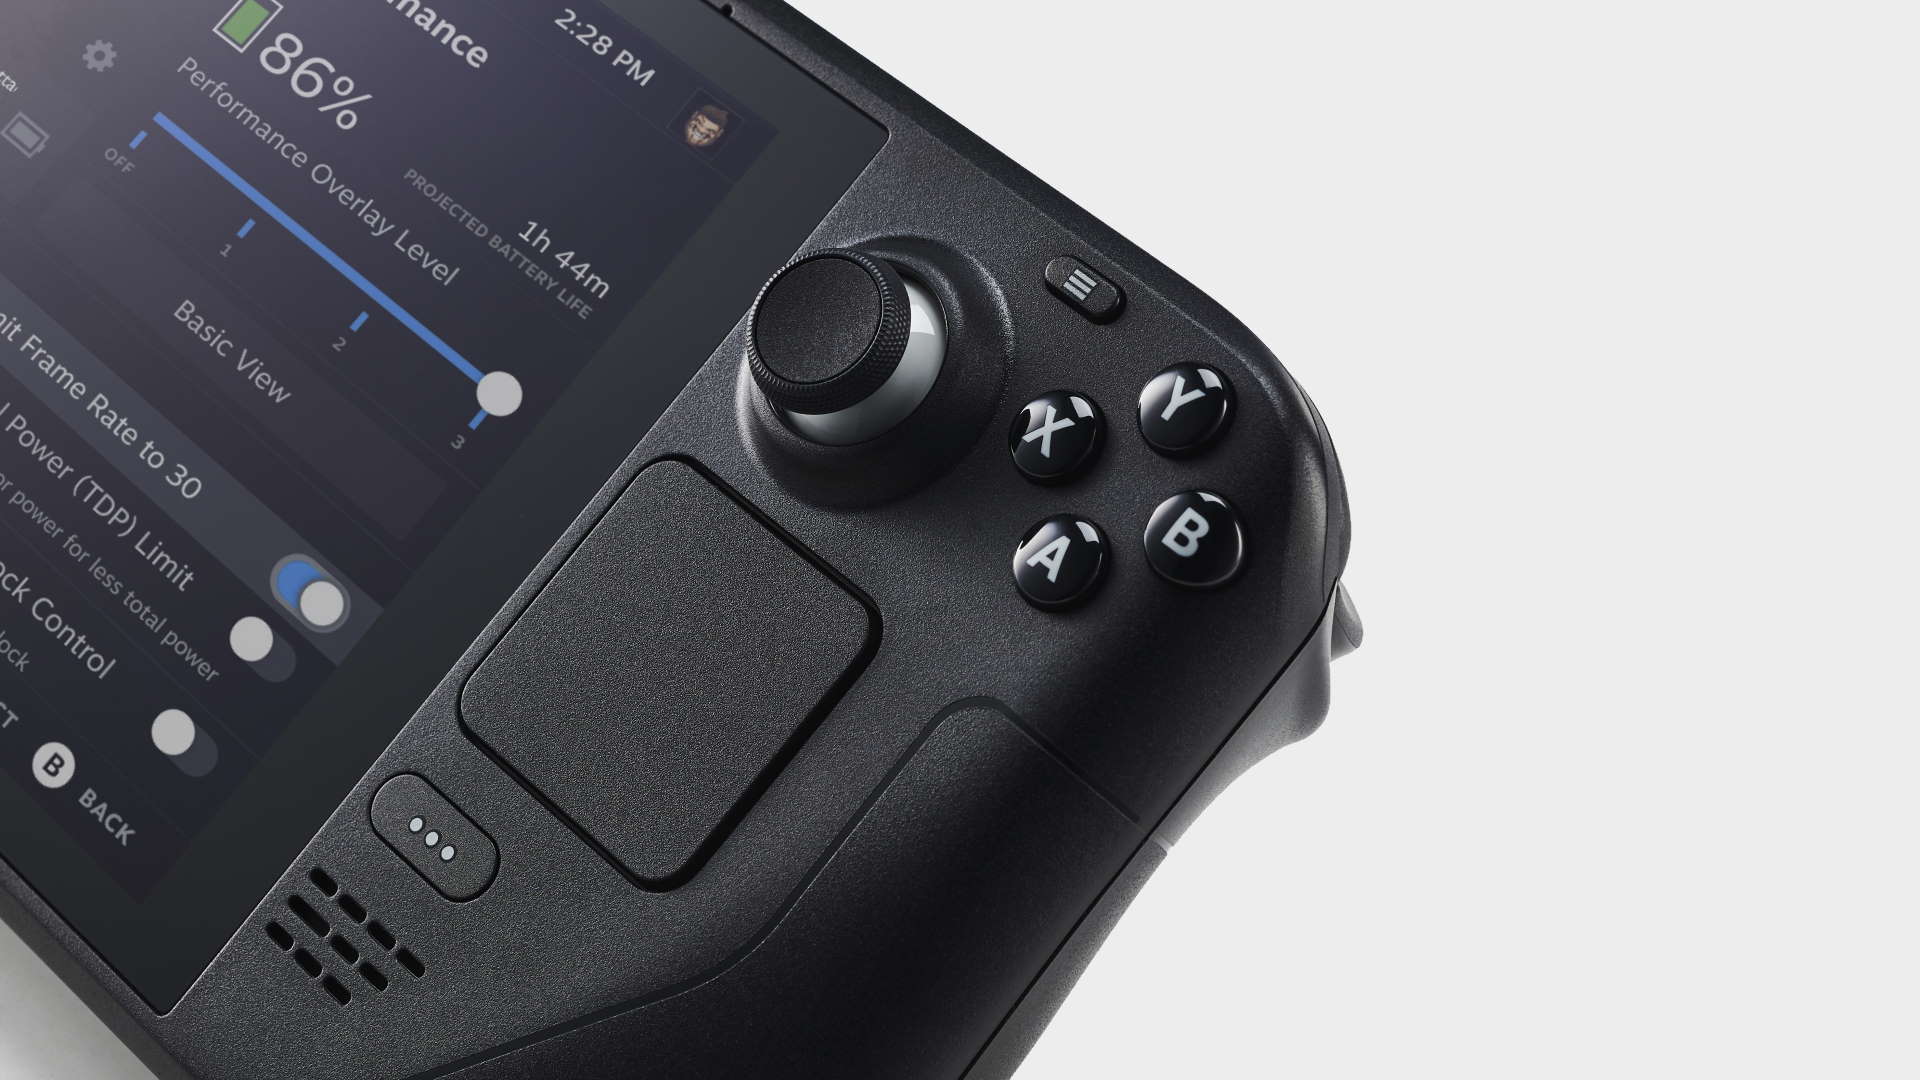 Steam Deck 2.0 could focus on battery life over better performance